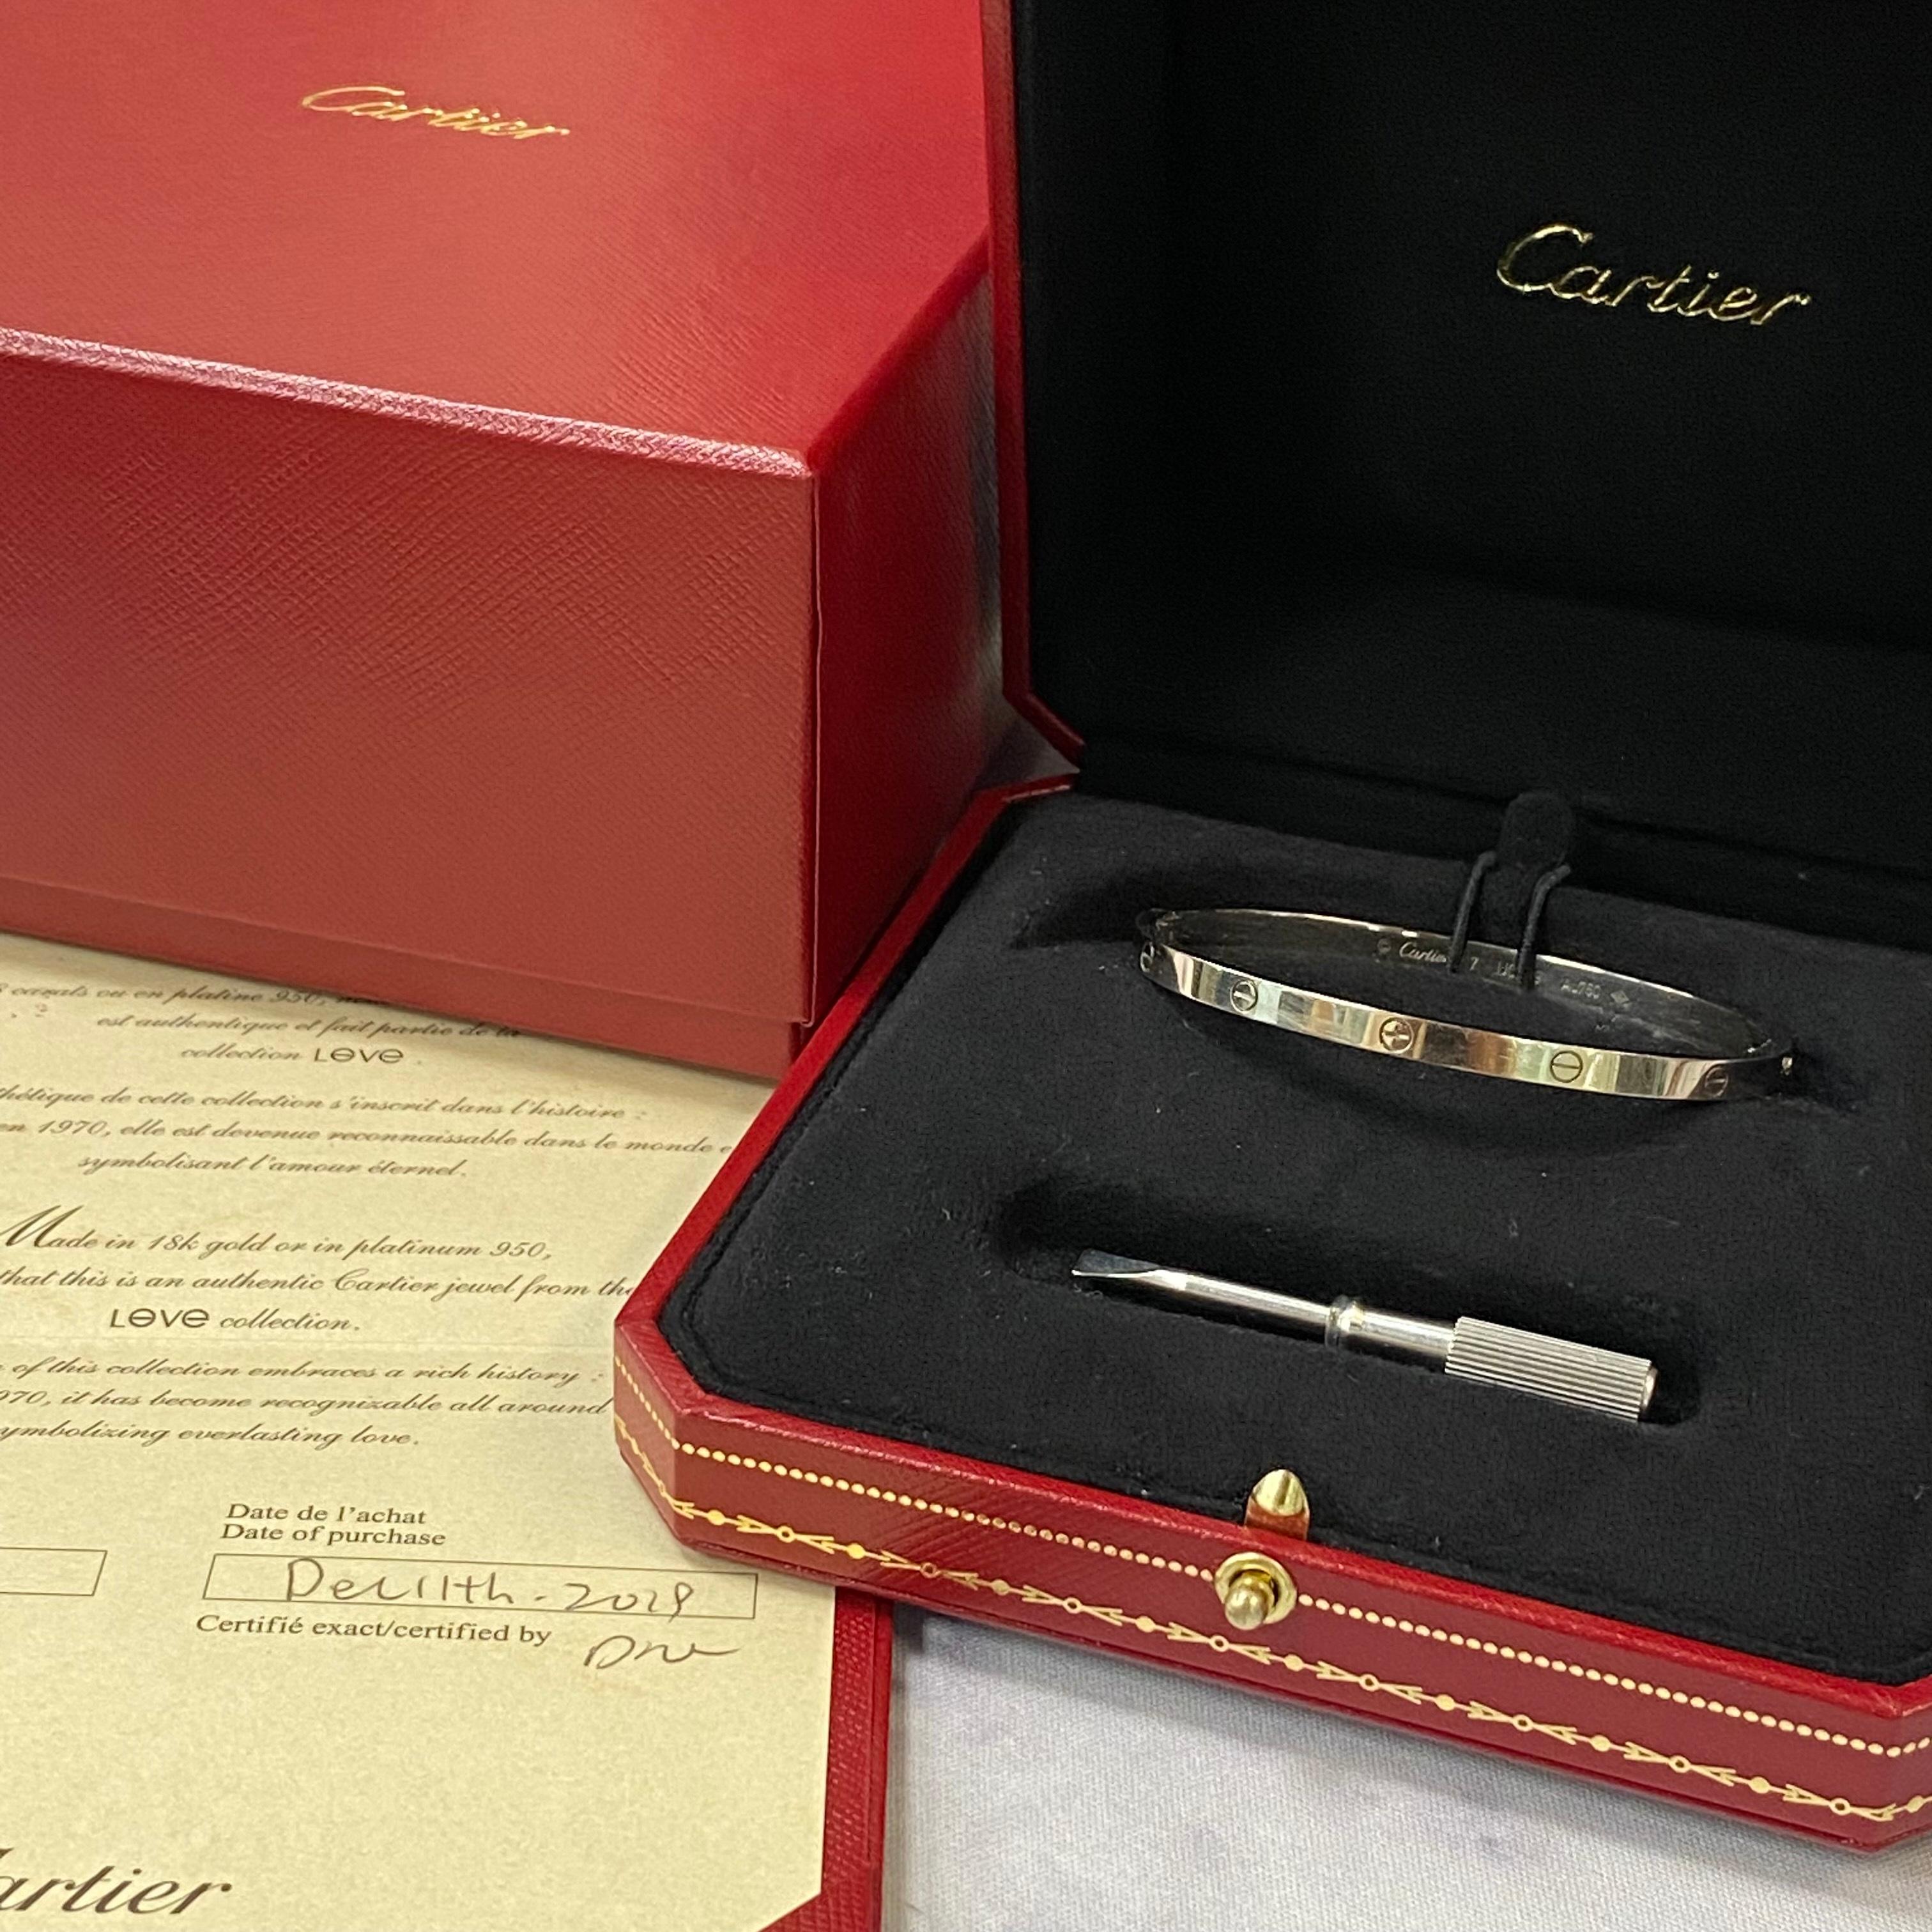 Cartier Love small model bracelet. crafted in 18K white gold. Width: 3.65mm. Size 17.
Excellent pre-owned condition. Sold with a screwdriver, box and papers. 
